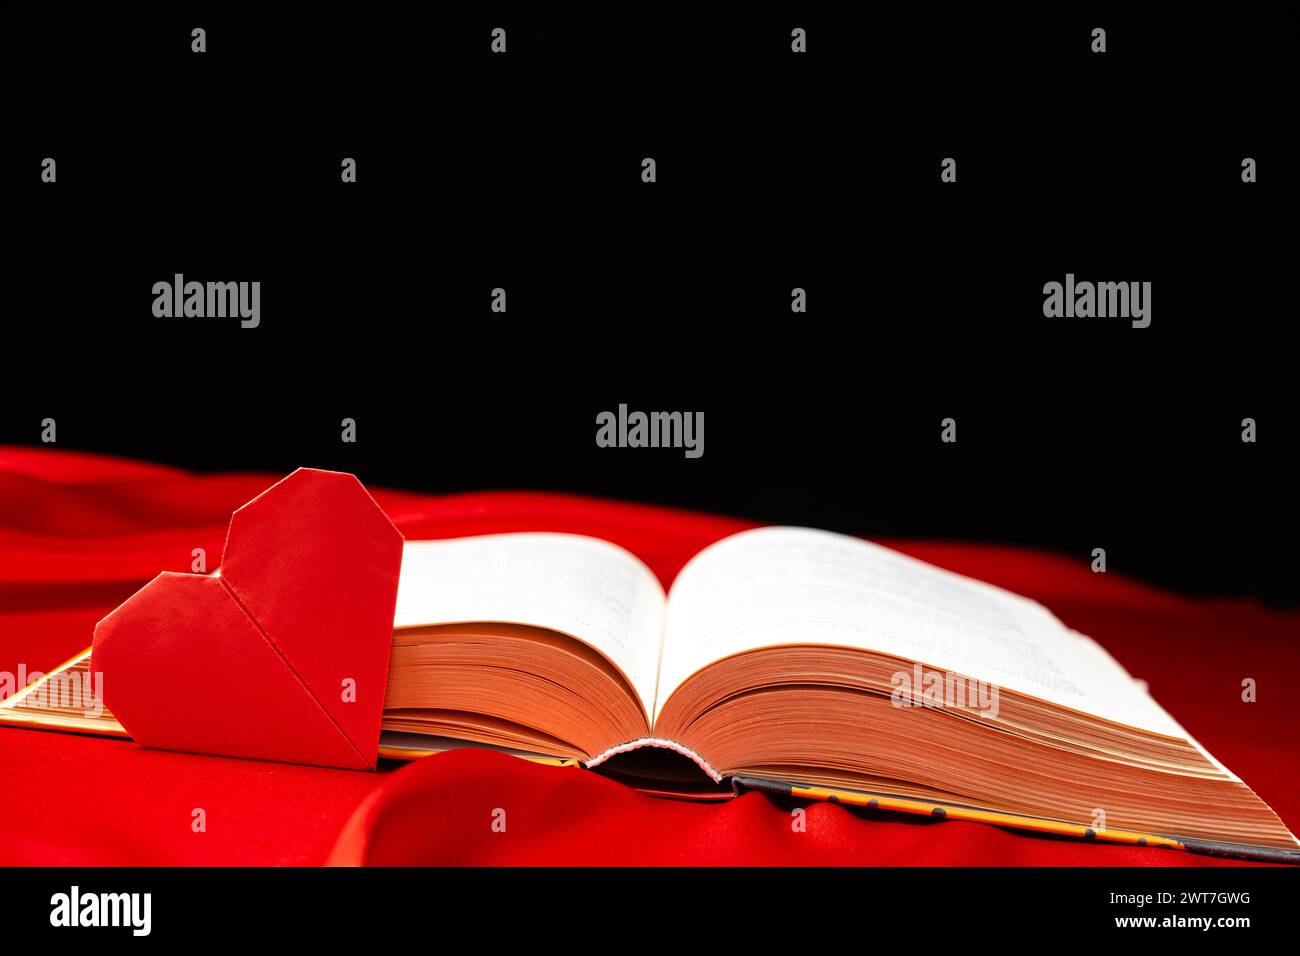 Origami paper heart and thick book on red and black background. Love for books. Stock Photo